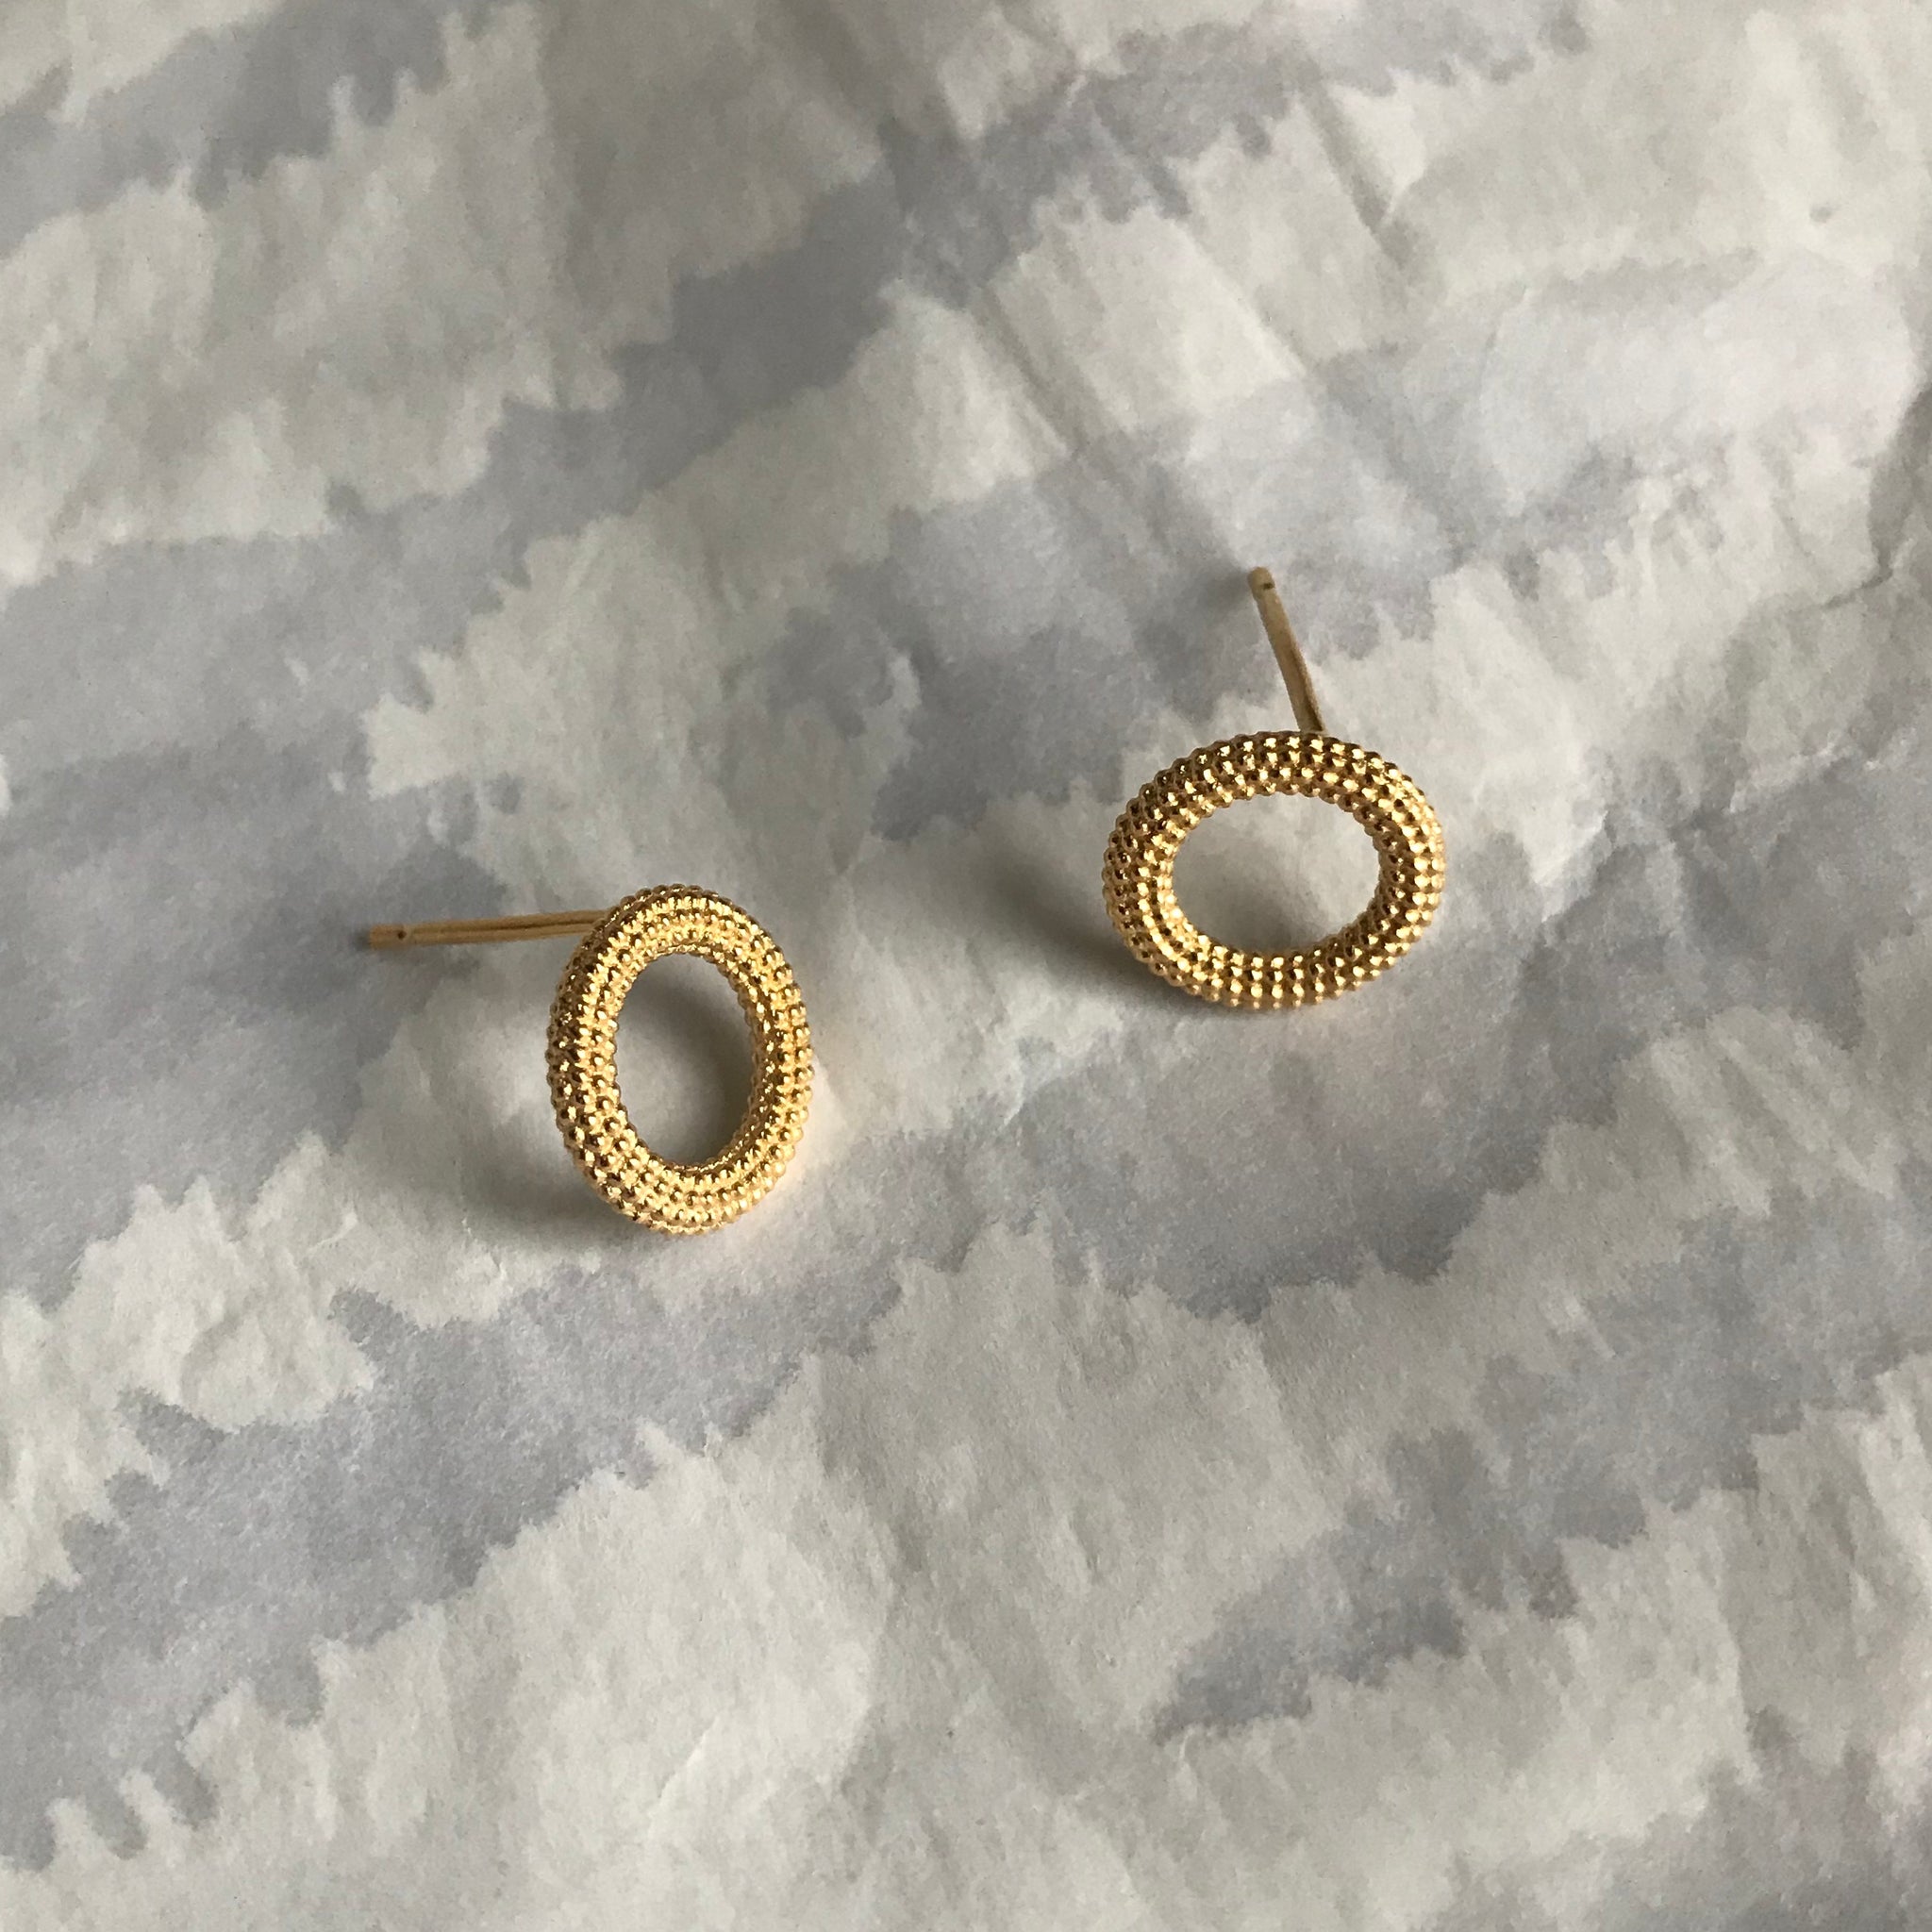 A pair of donut shaped yellow gold stud earrings with dot texture